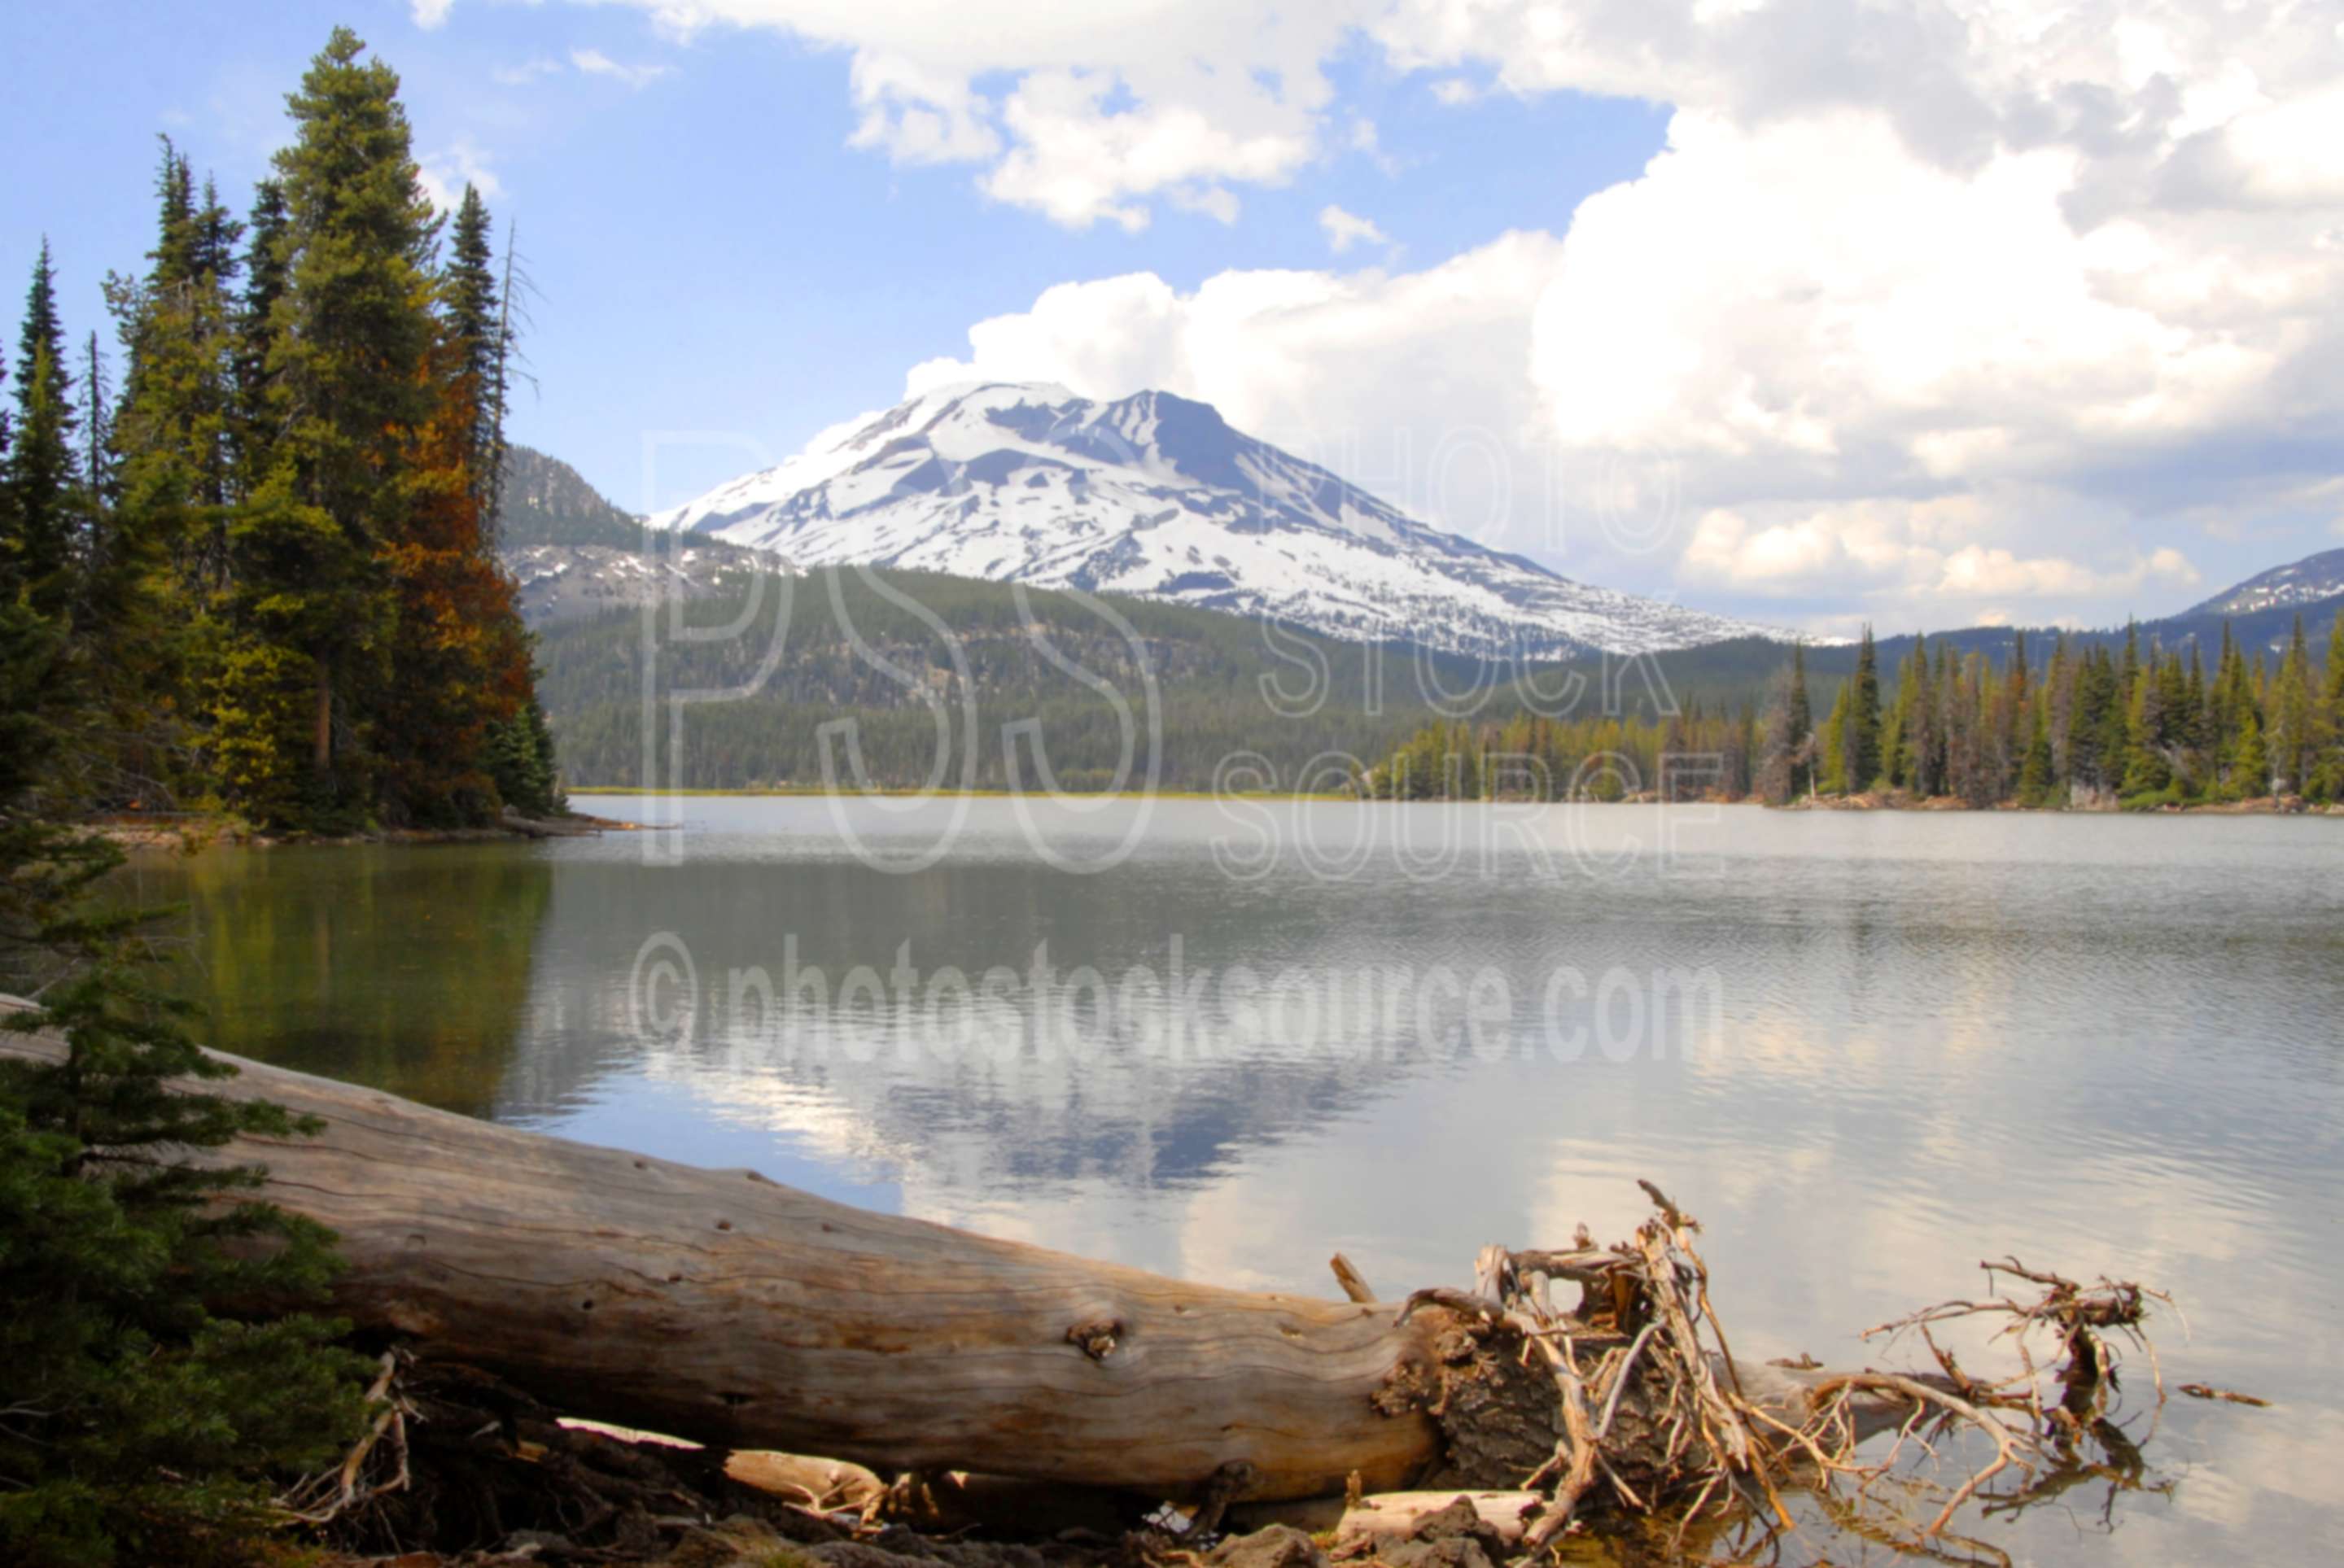 South Sister,three sisters,three sisters wilderness,wilderness,snow,sparks lake,lake,lakes rivers,mountains